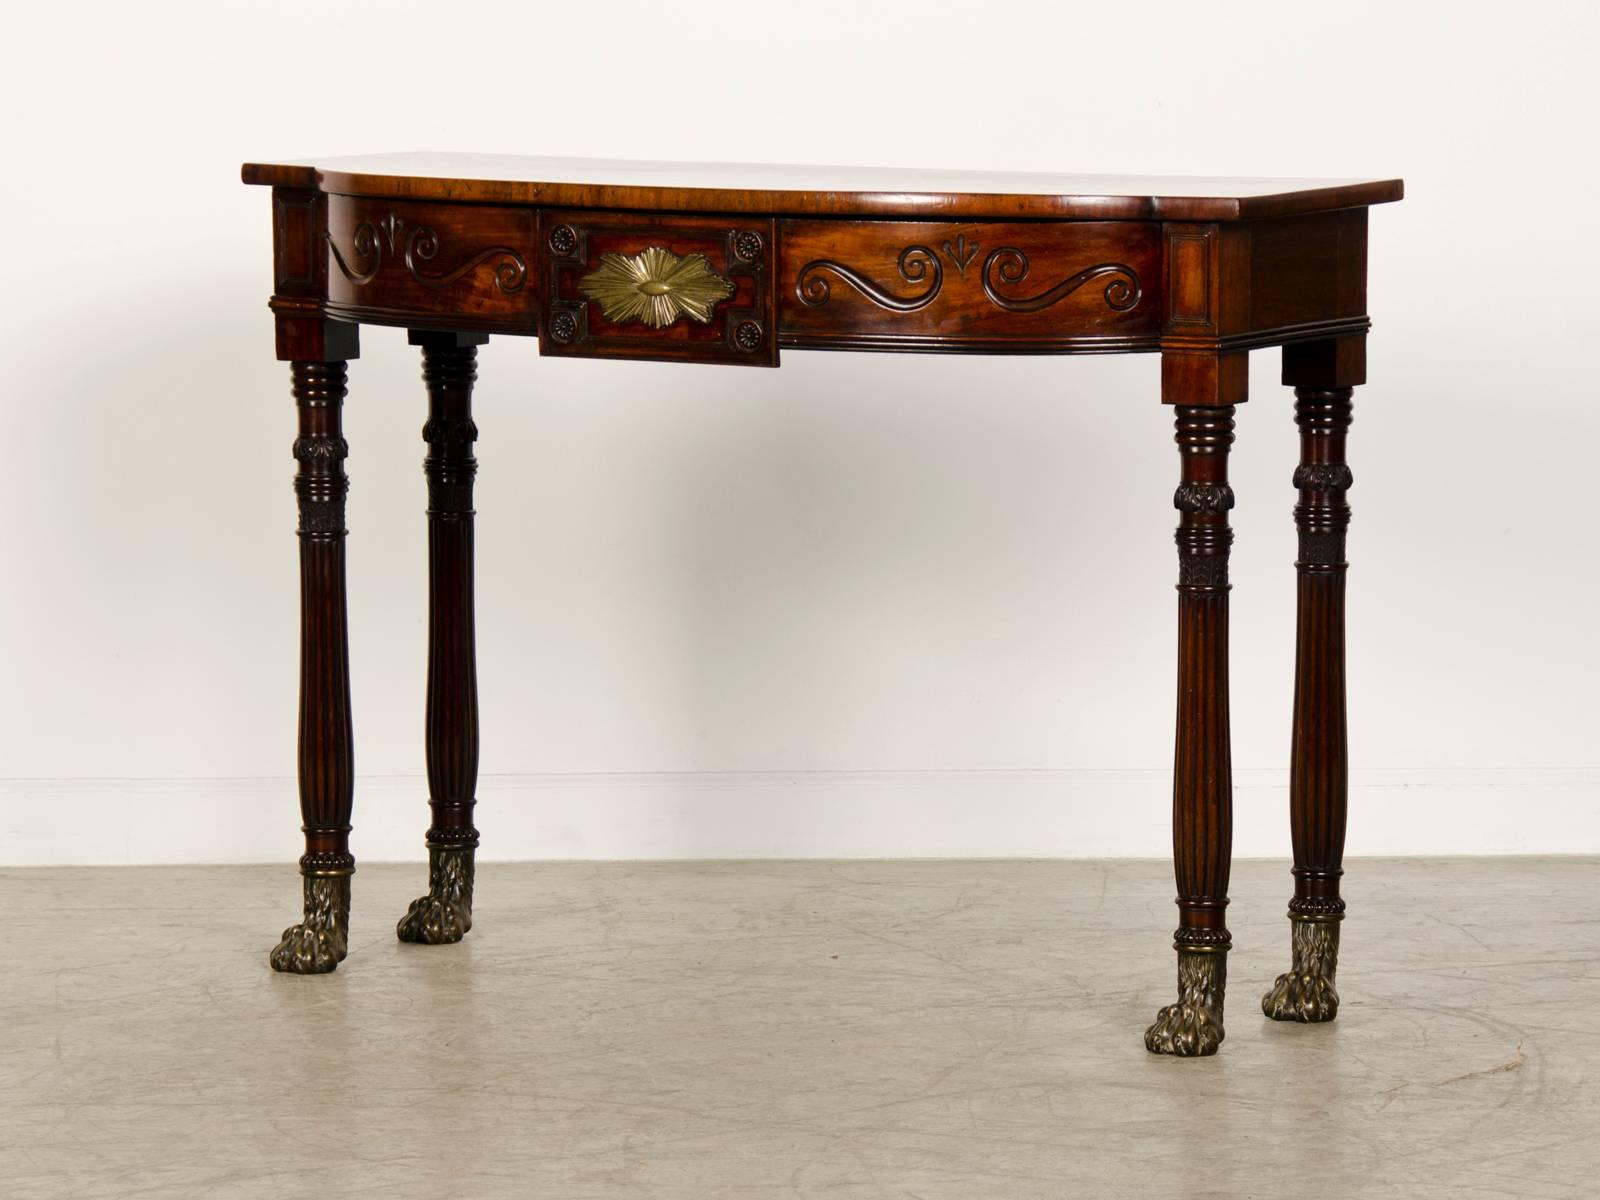 Carved George Bullock Style William IV Period Antique English Mahogany Console Table For Sale